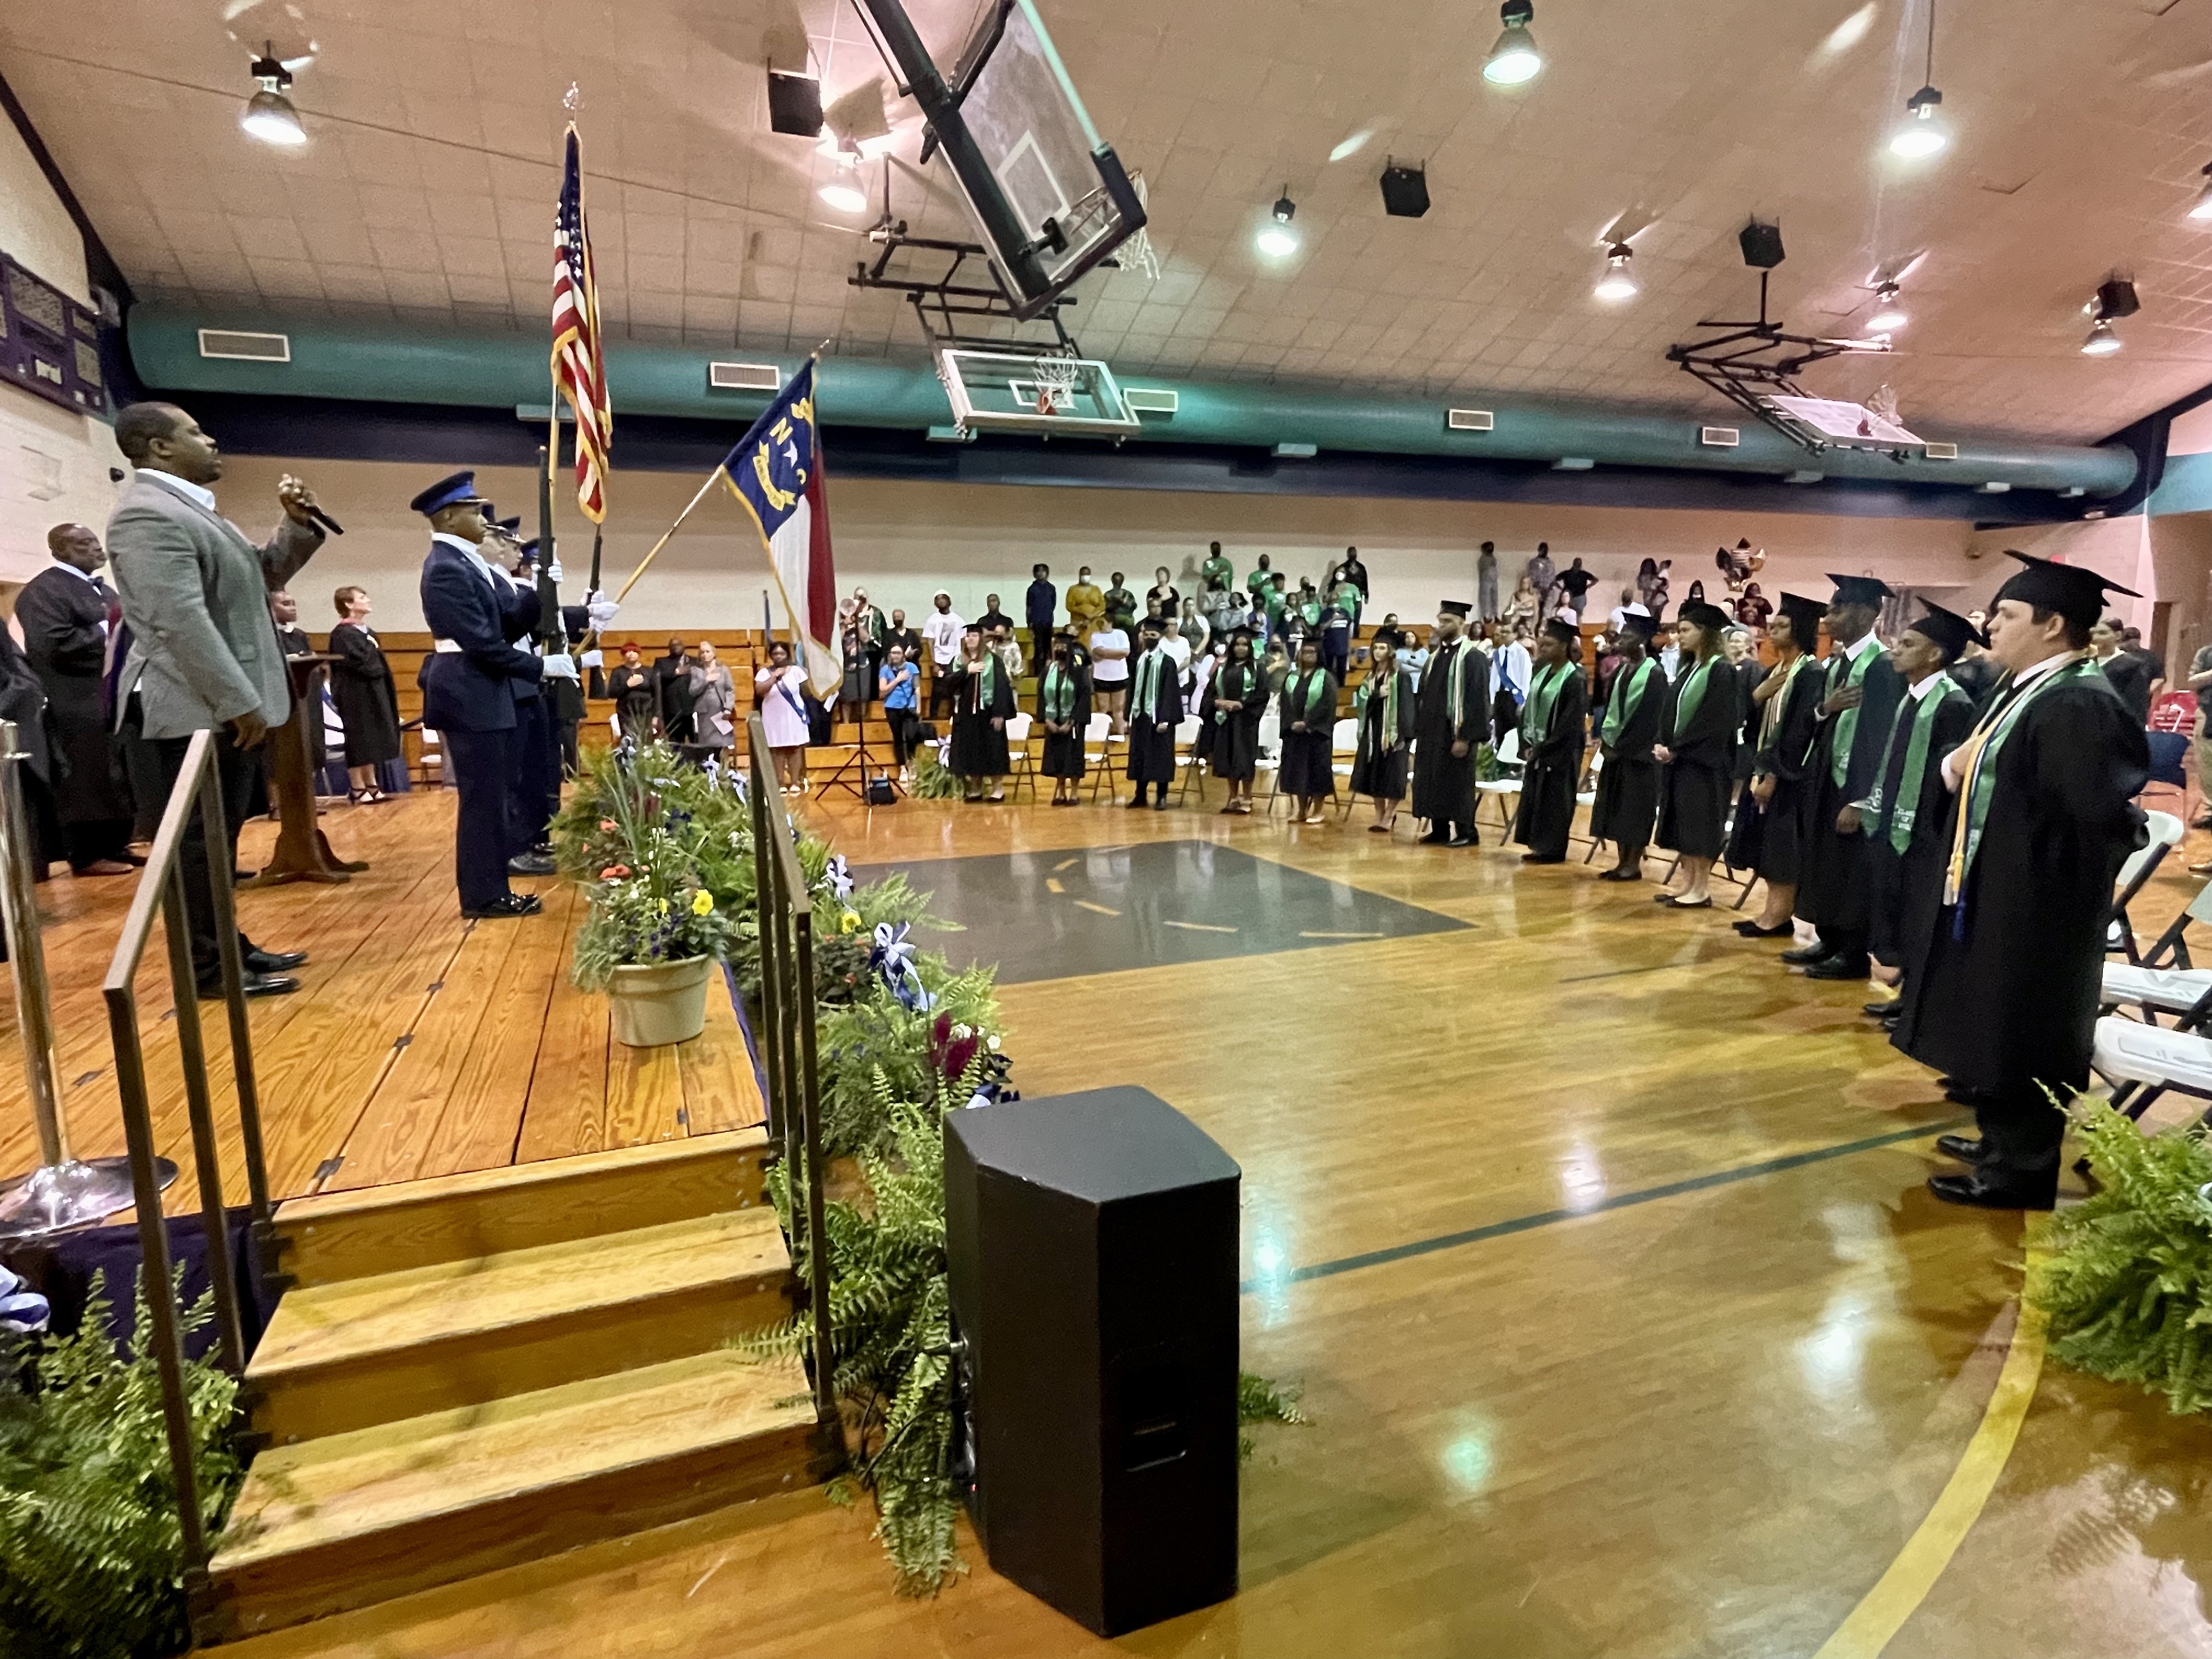 Honor guard presenting american and nc flags on stage at high school graduation, with graduates watching